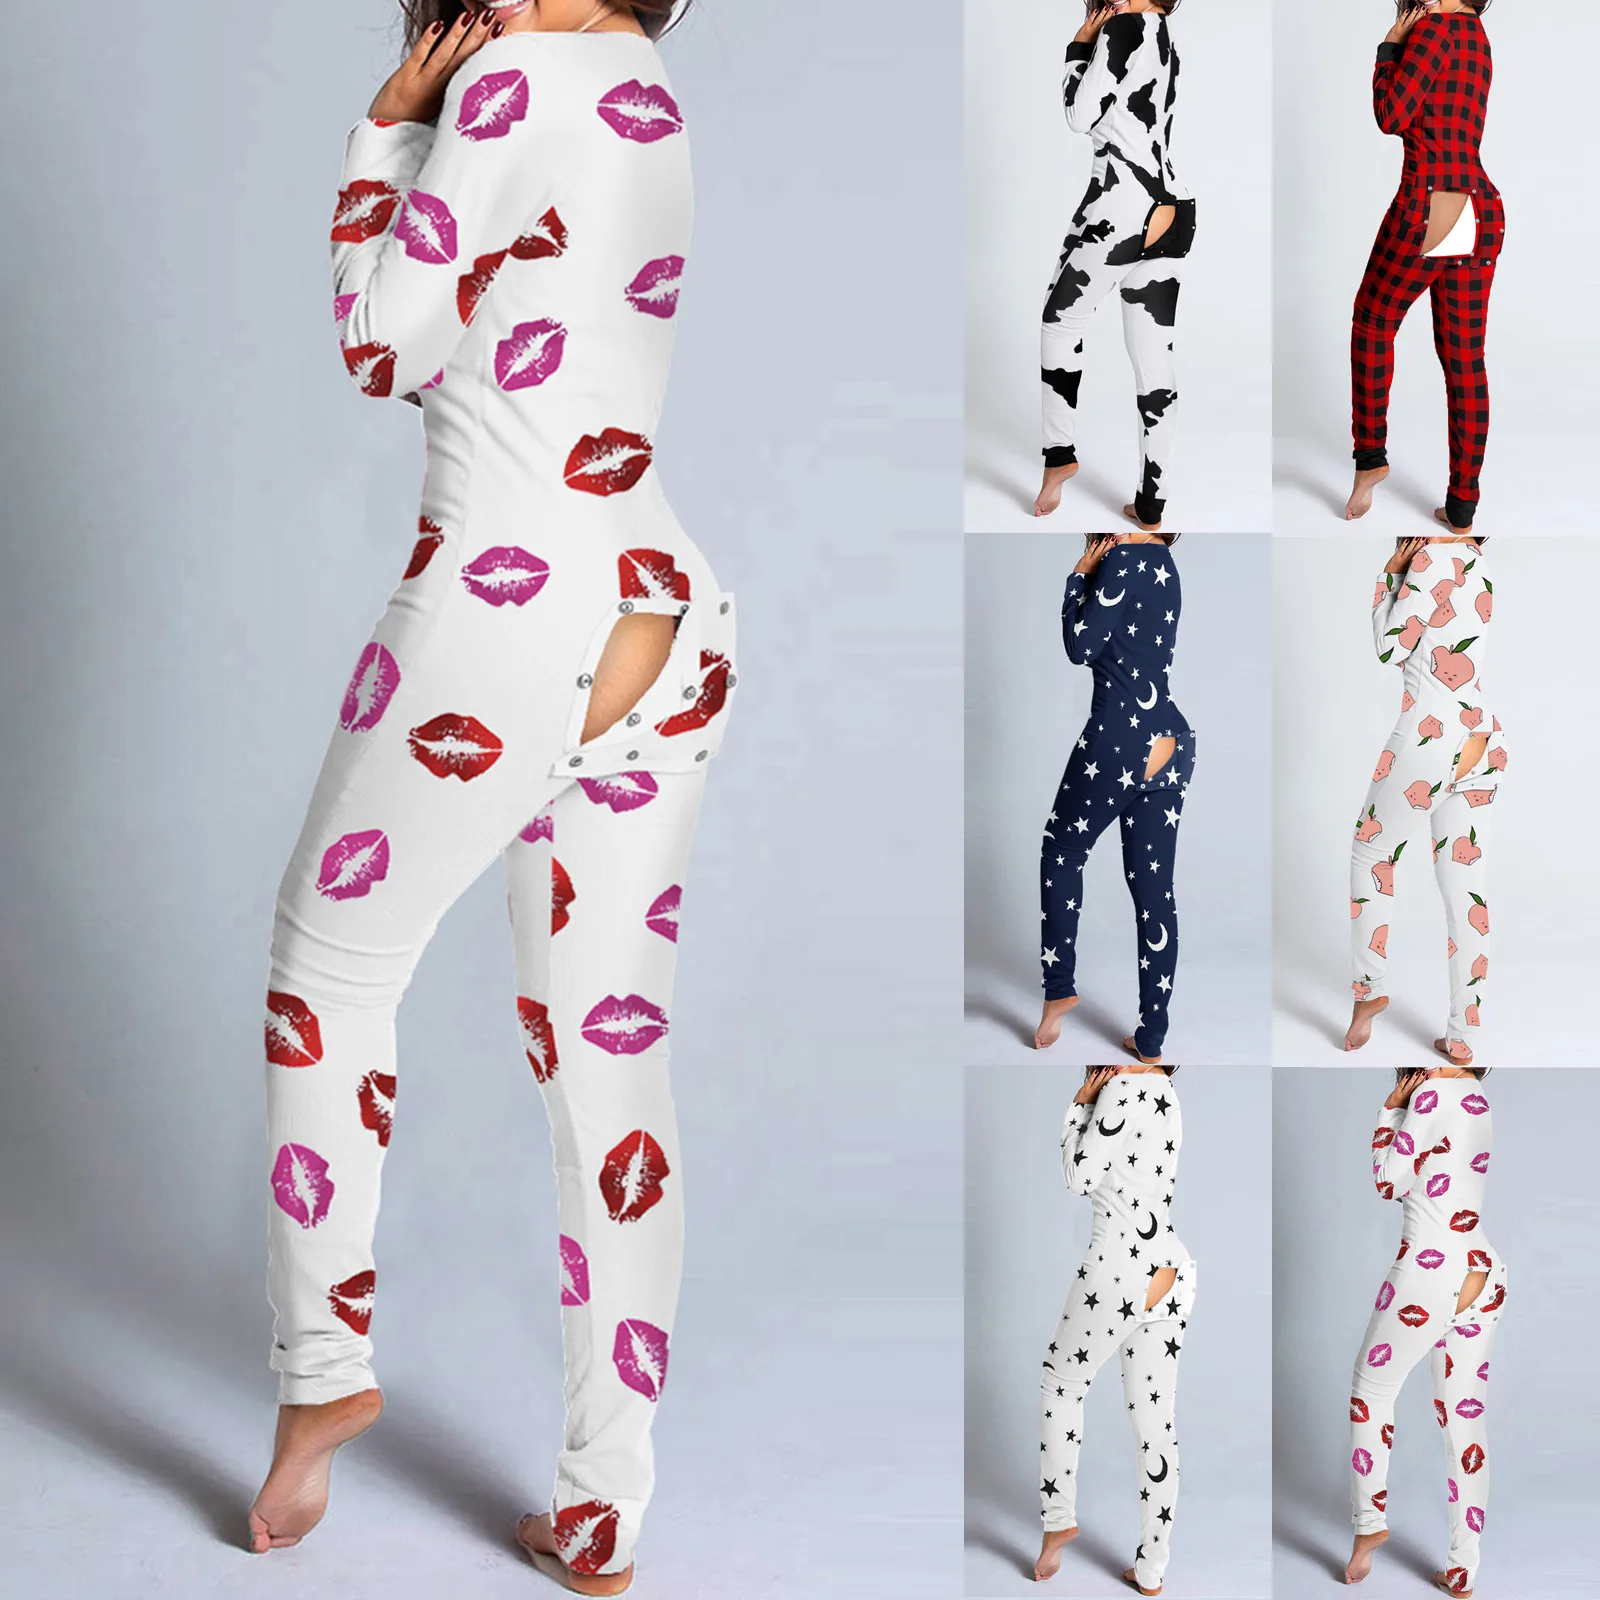 Sexy Women's Pijamas Onesies Button-down Front V-neck Pajamas Adults Jumpsuit Functional Buttoned Flap Pyjama Femme Sleepwear images - 6